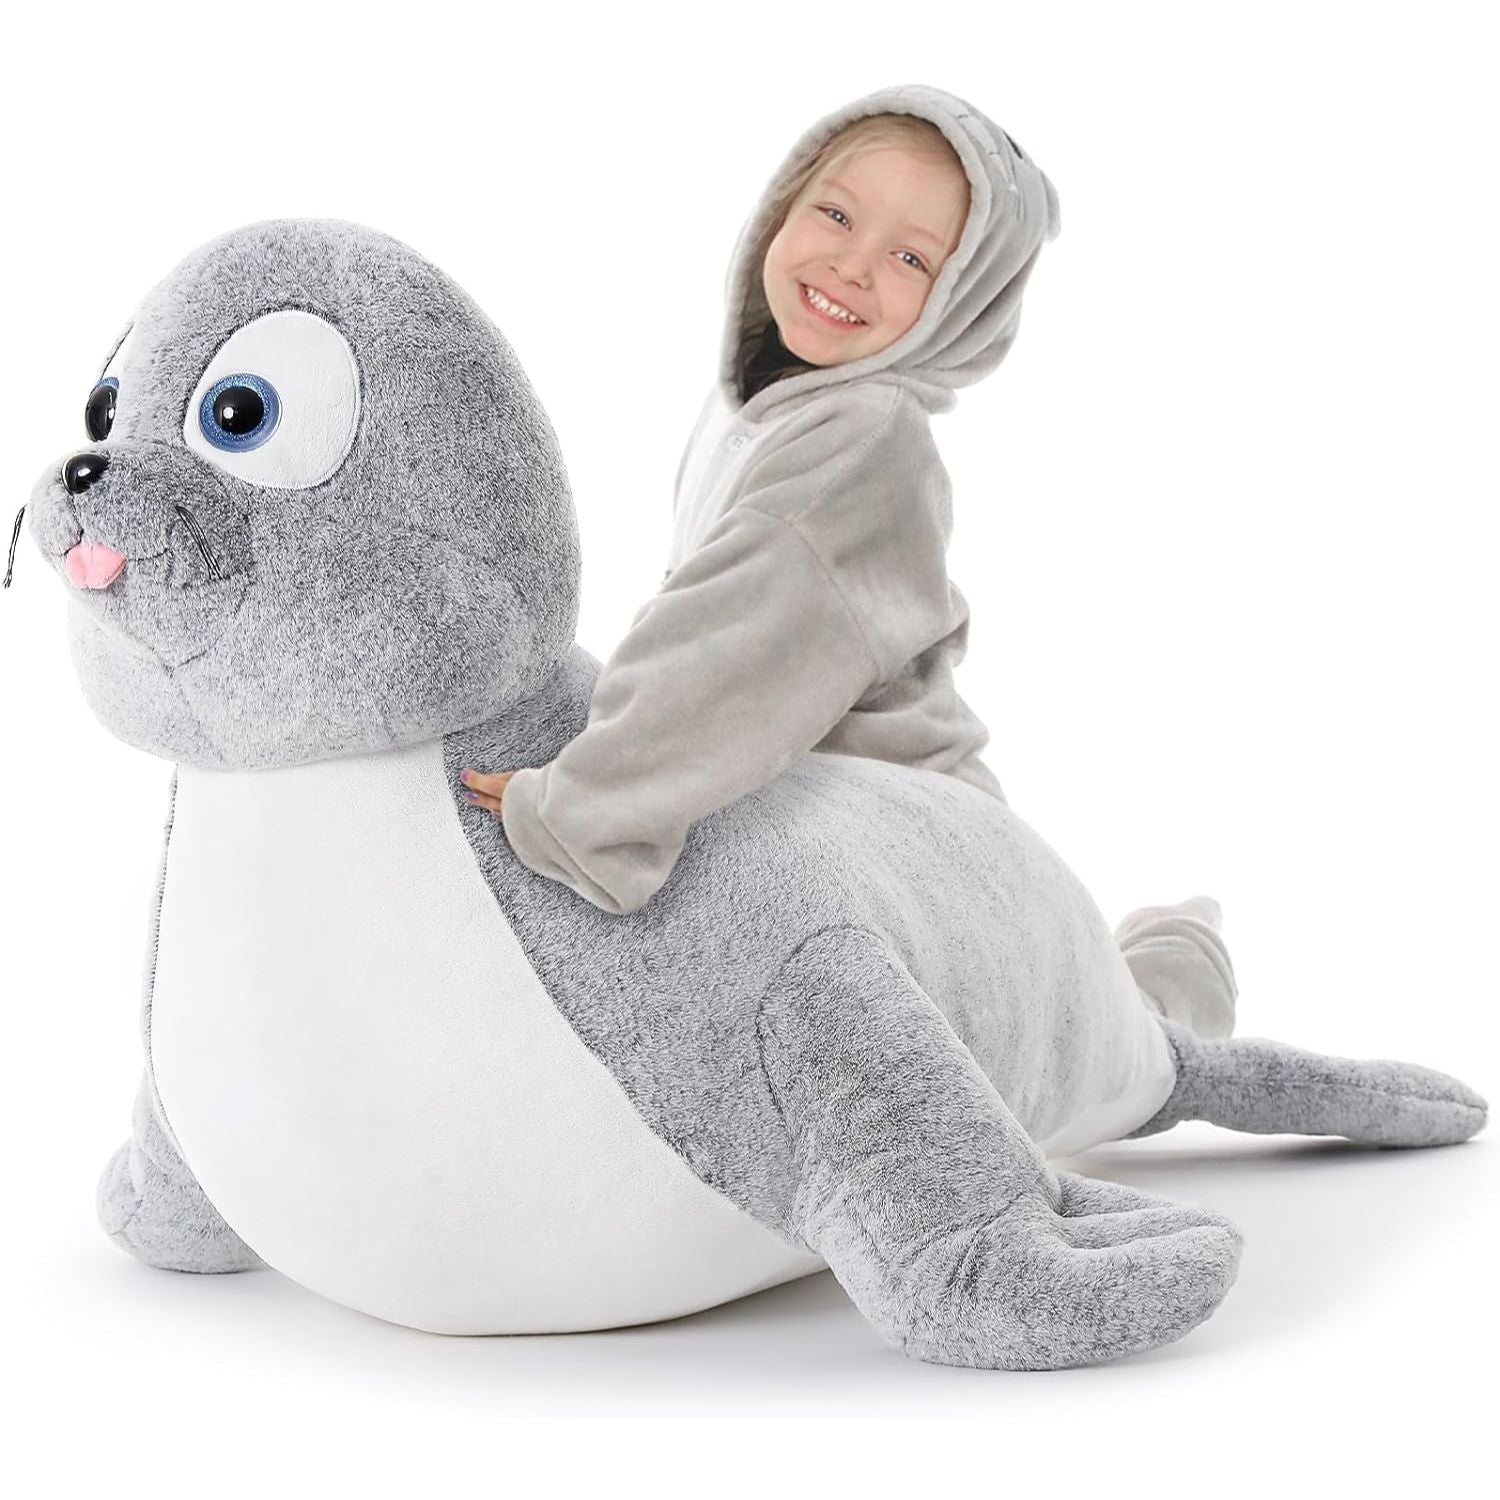 Giant Seal Stuffed Toy, Grey, 44 Inches